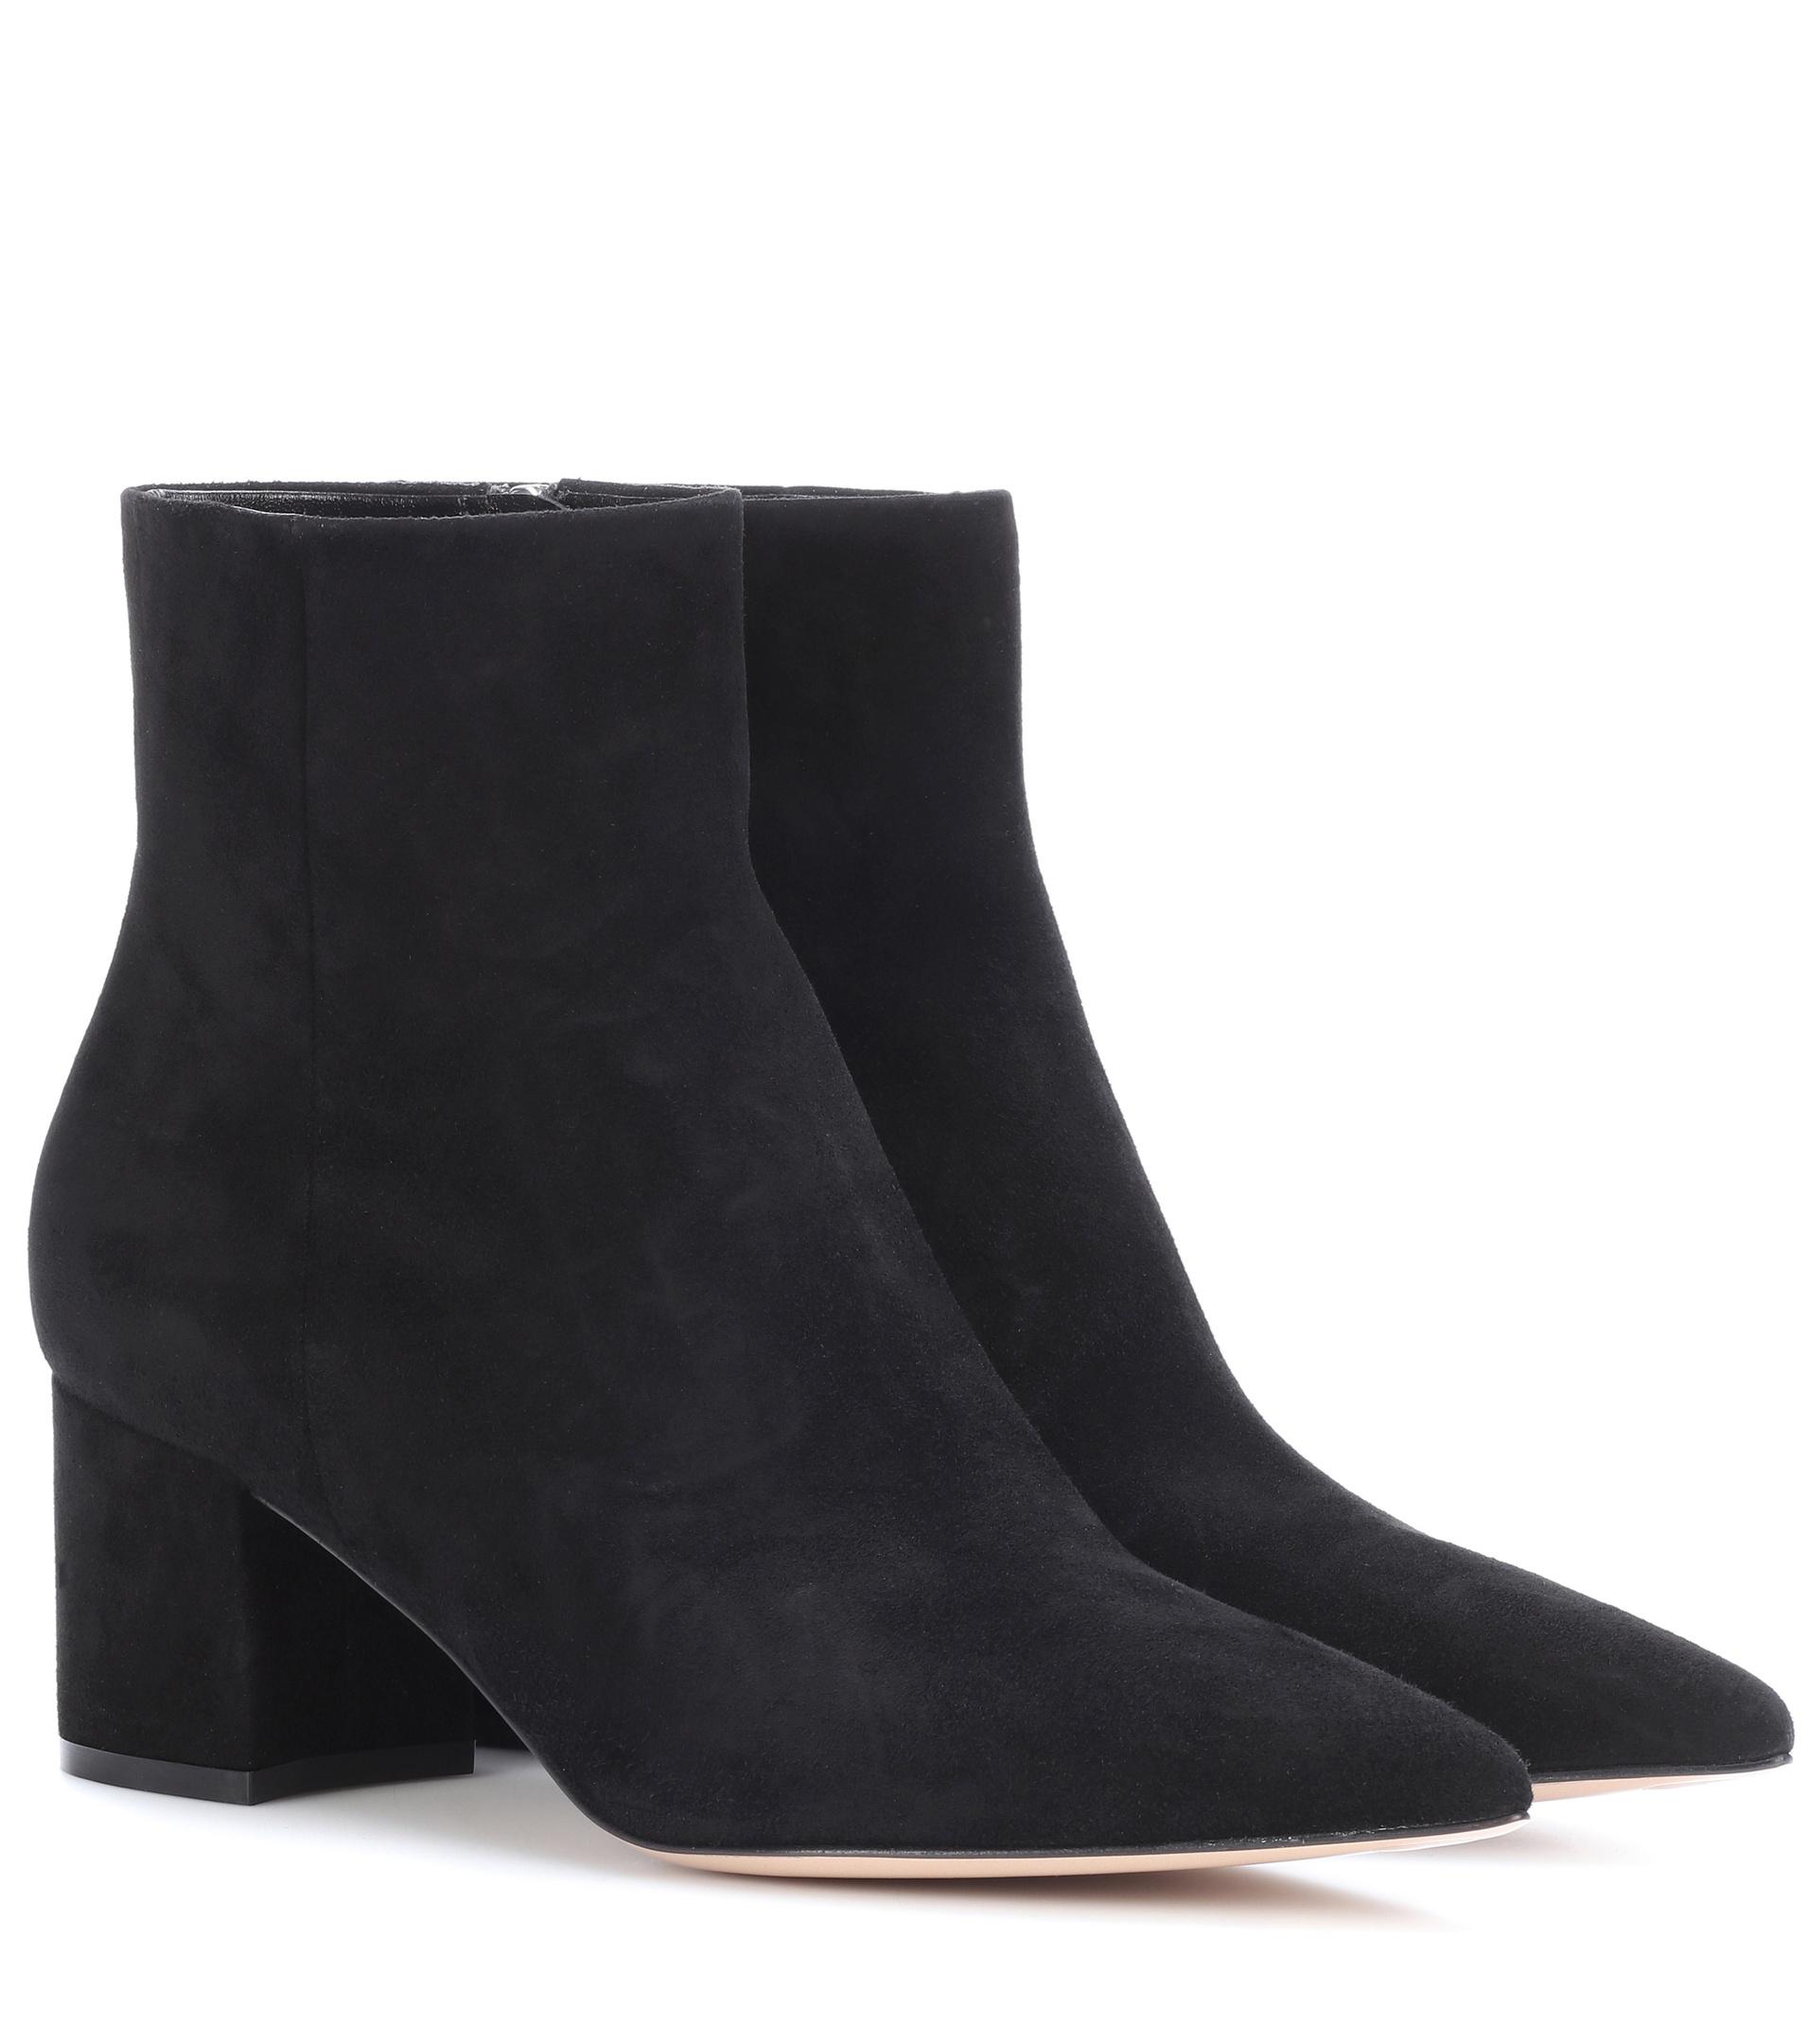 Gianvito Rossi Piper 60 Suede Ankle Boots in Black - Lyst